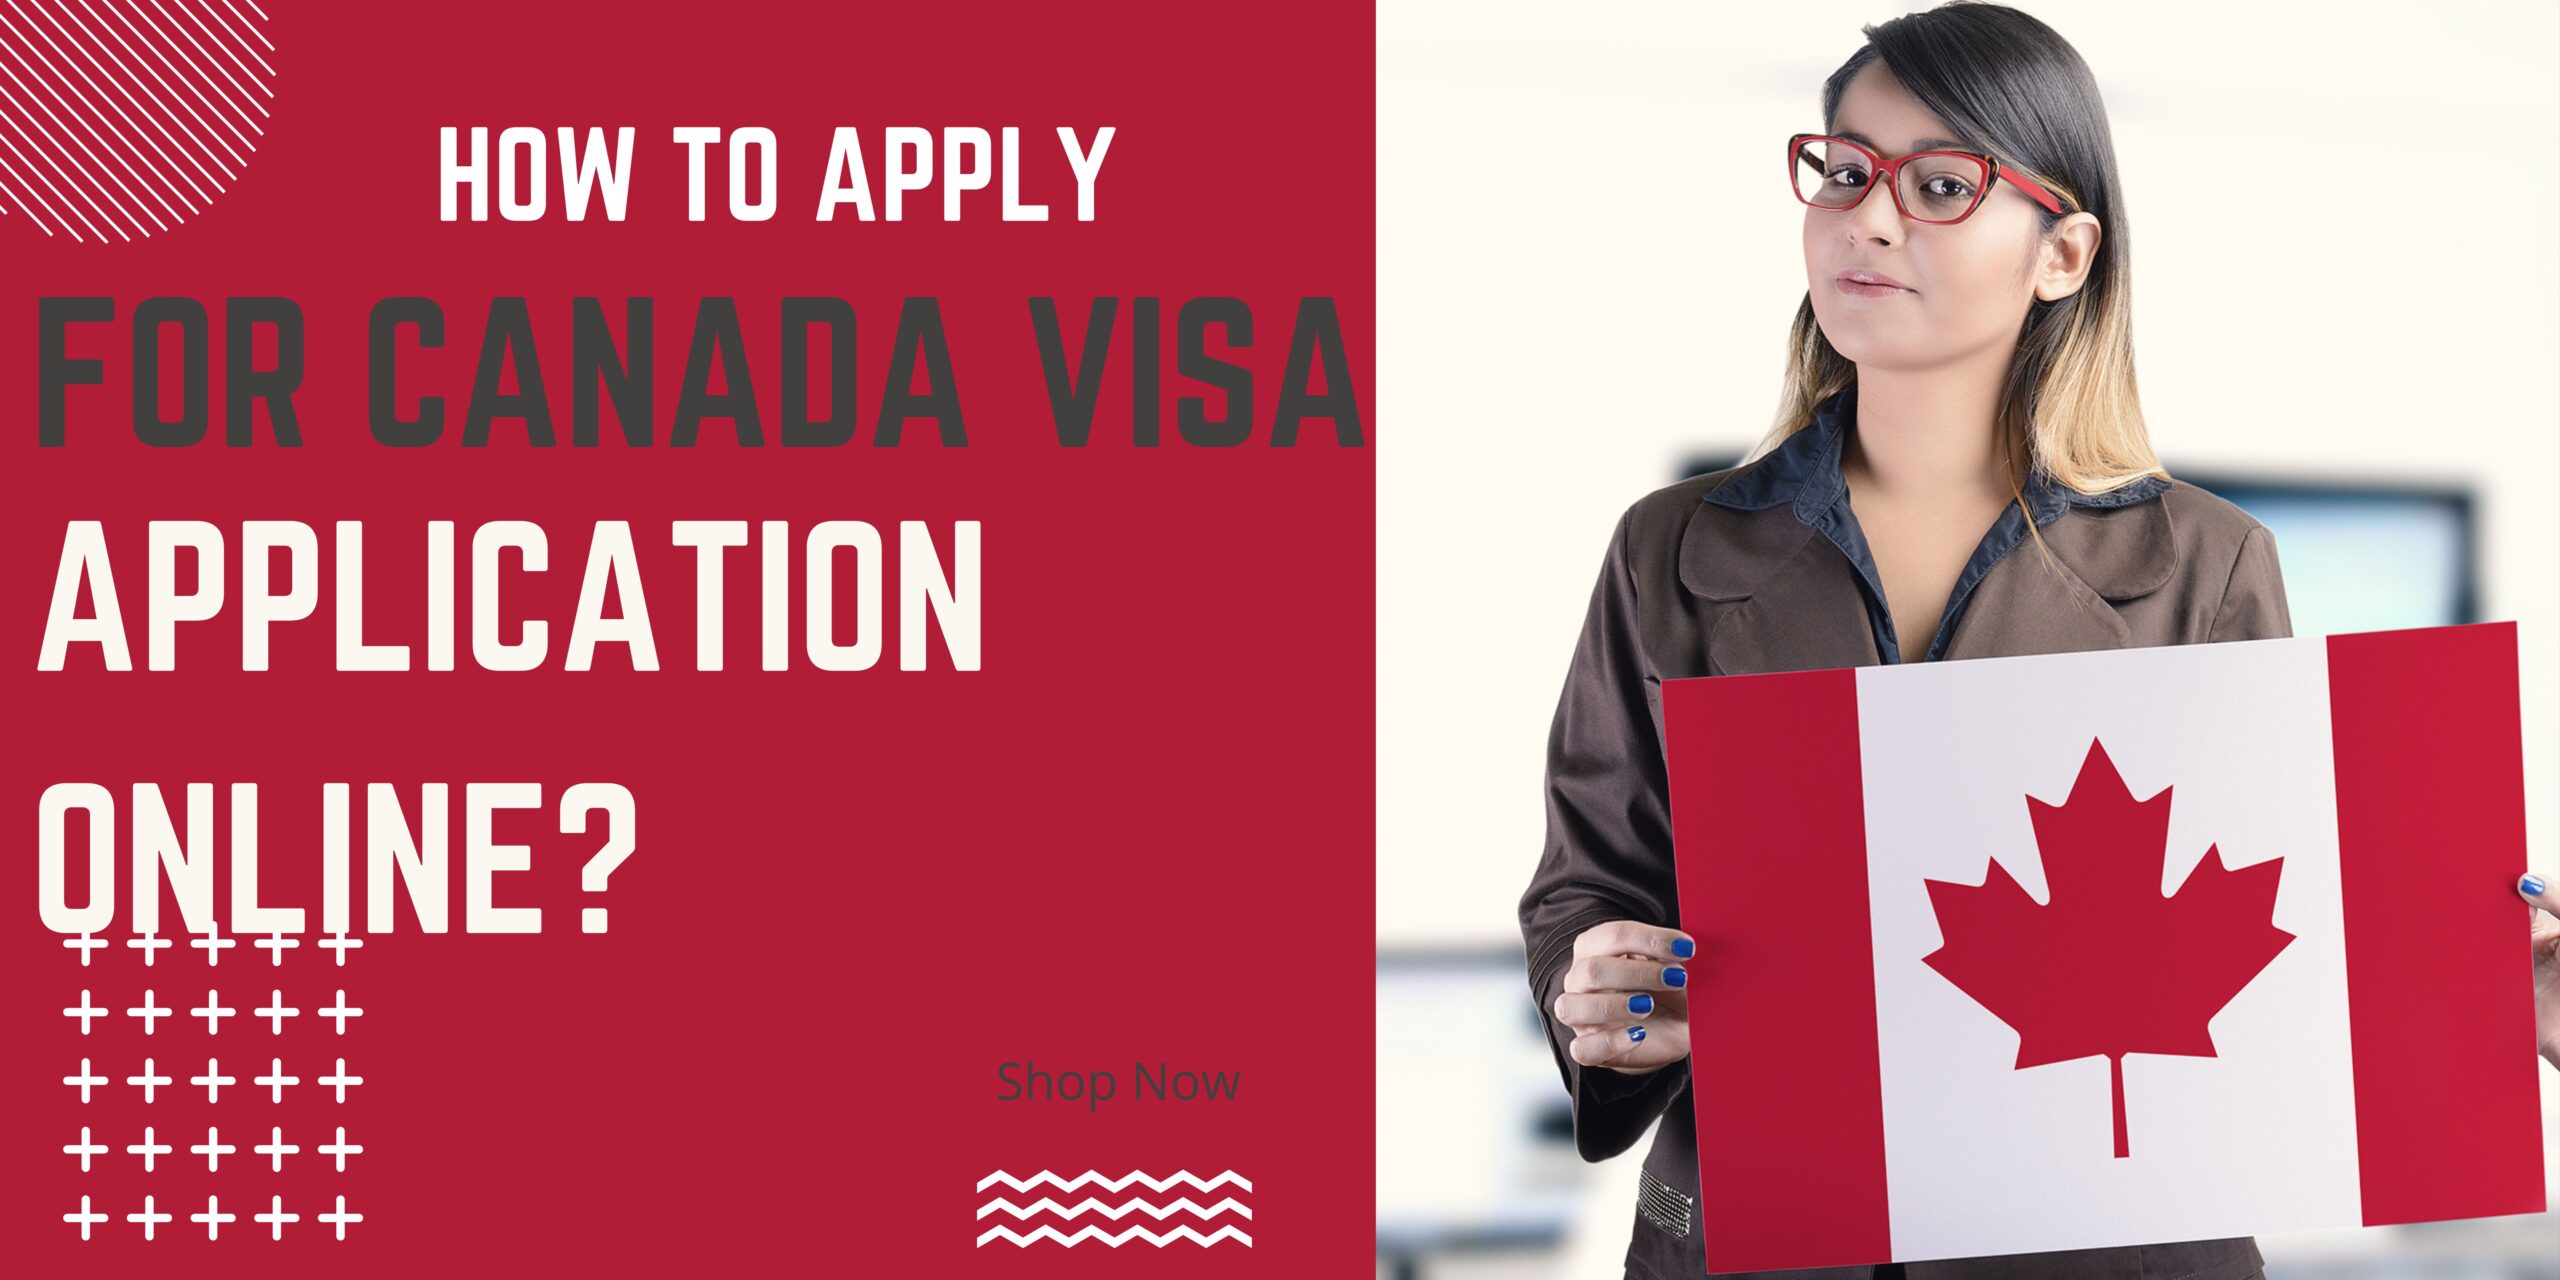 How To Apply For Canada Visa Application Online